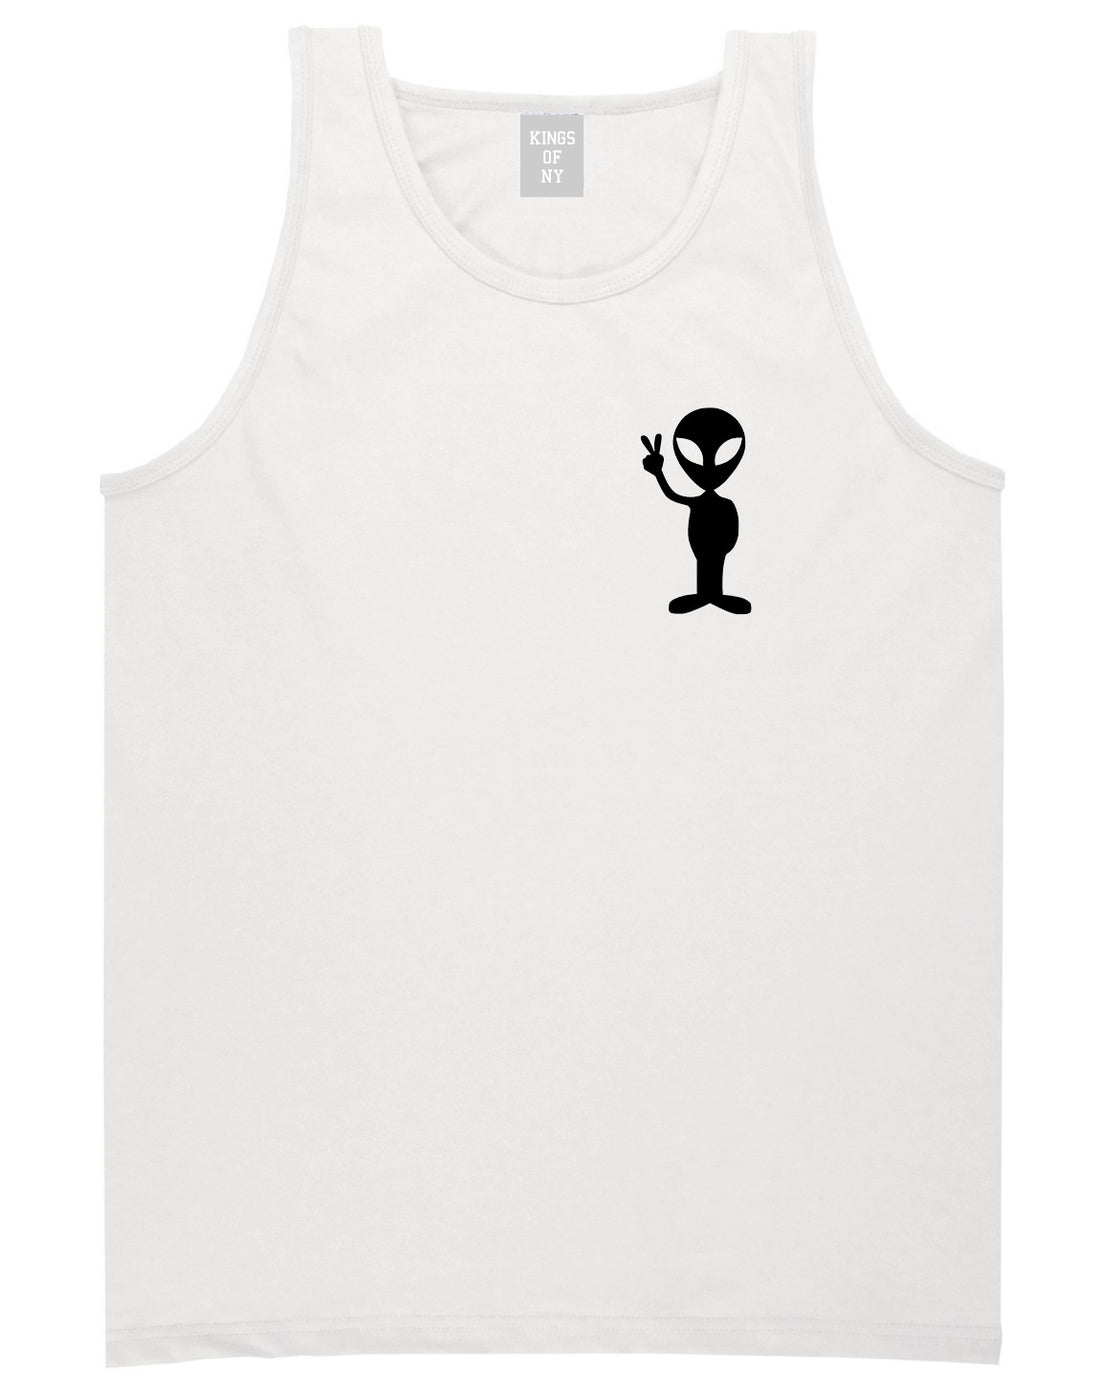 Alien Peace Sign Chest White Tank Top Shirt by Kings Of NY